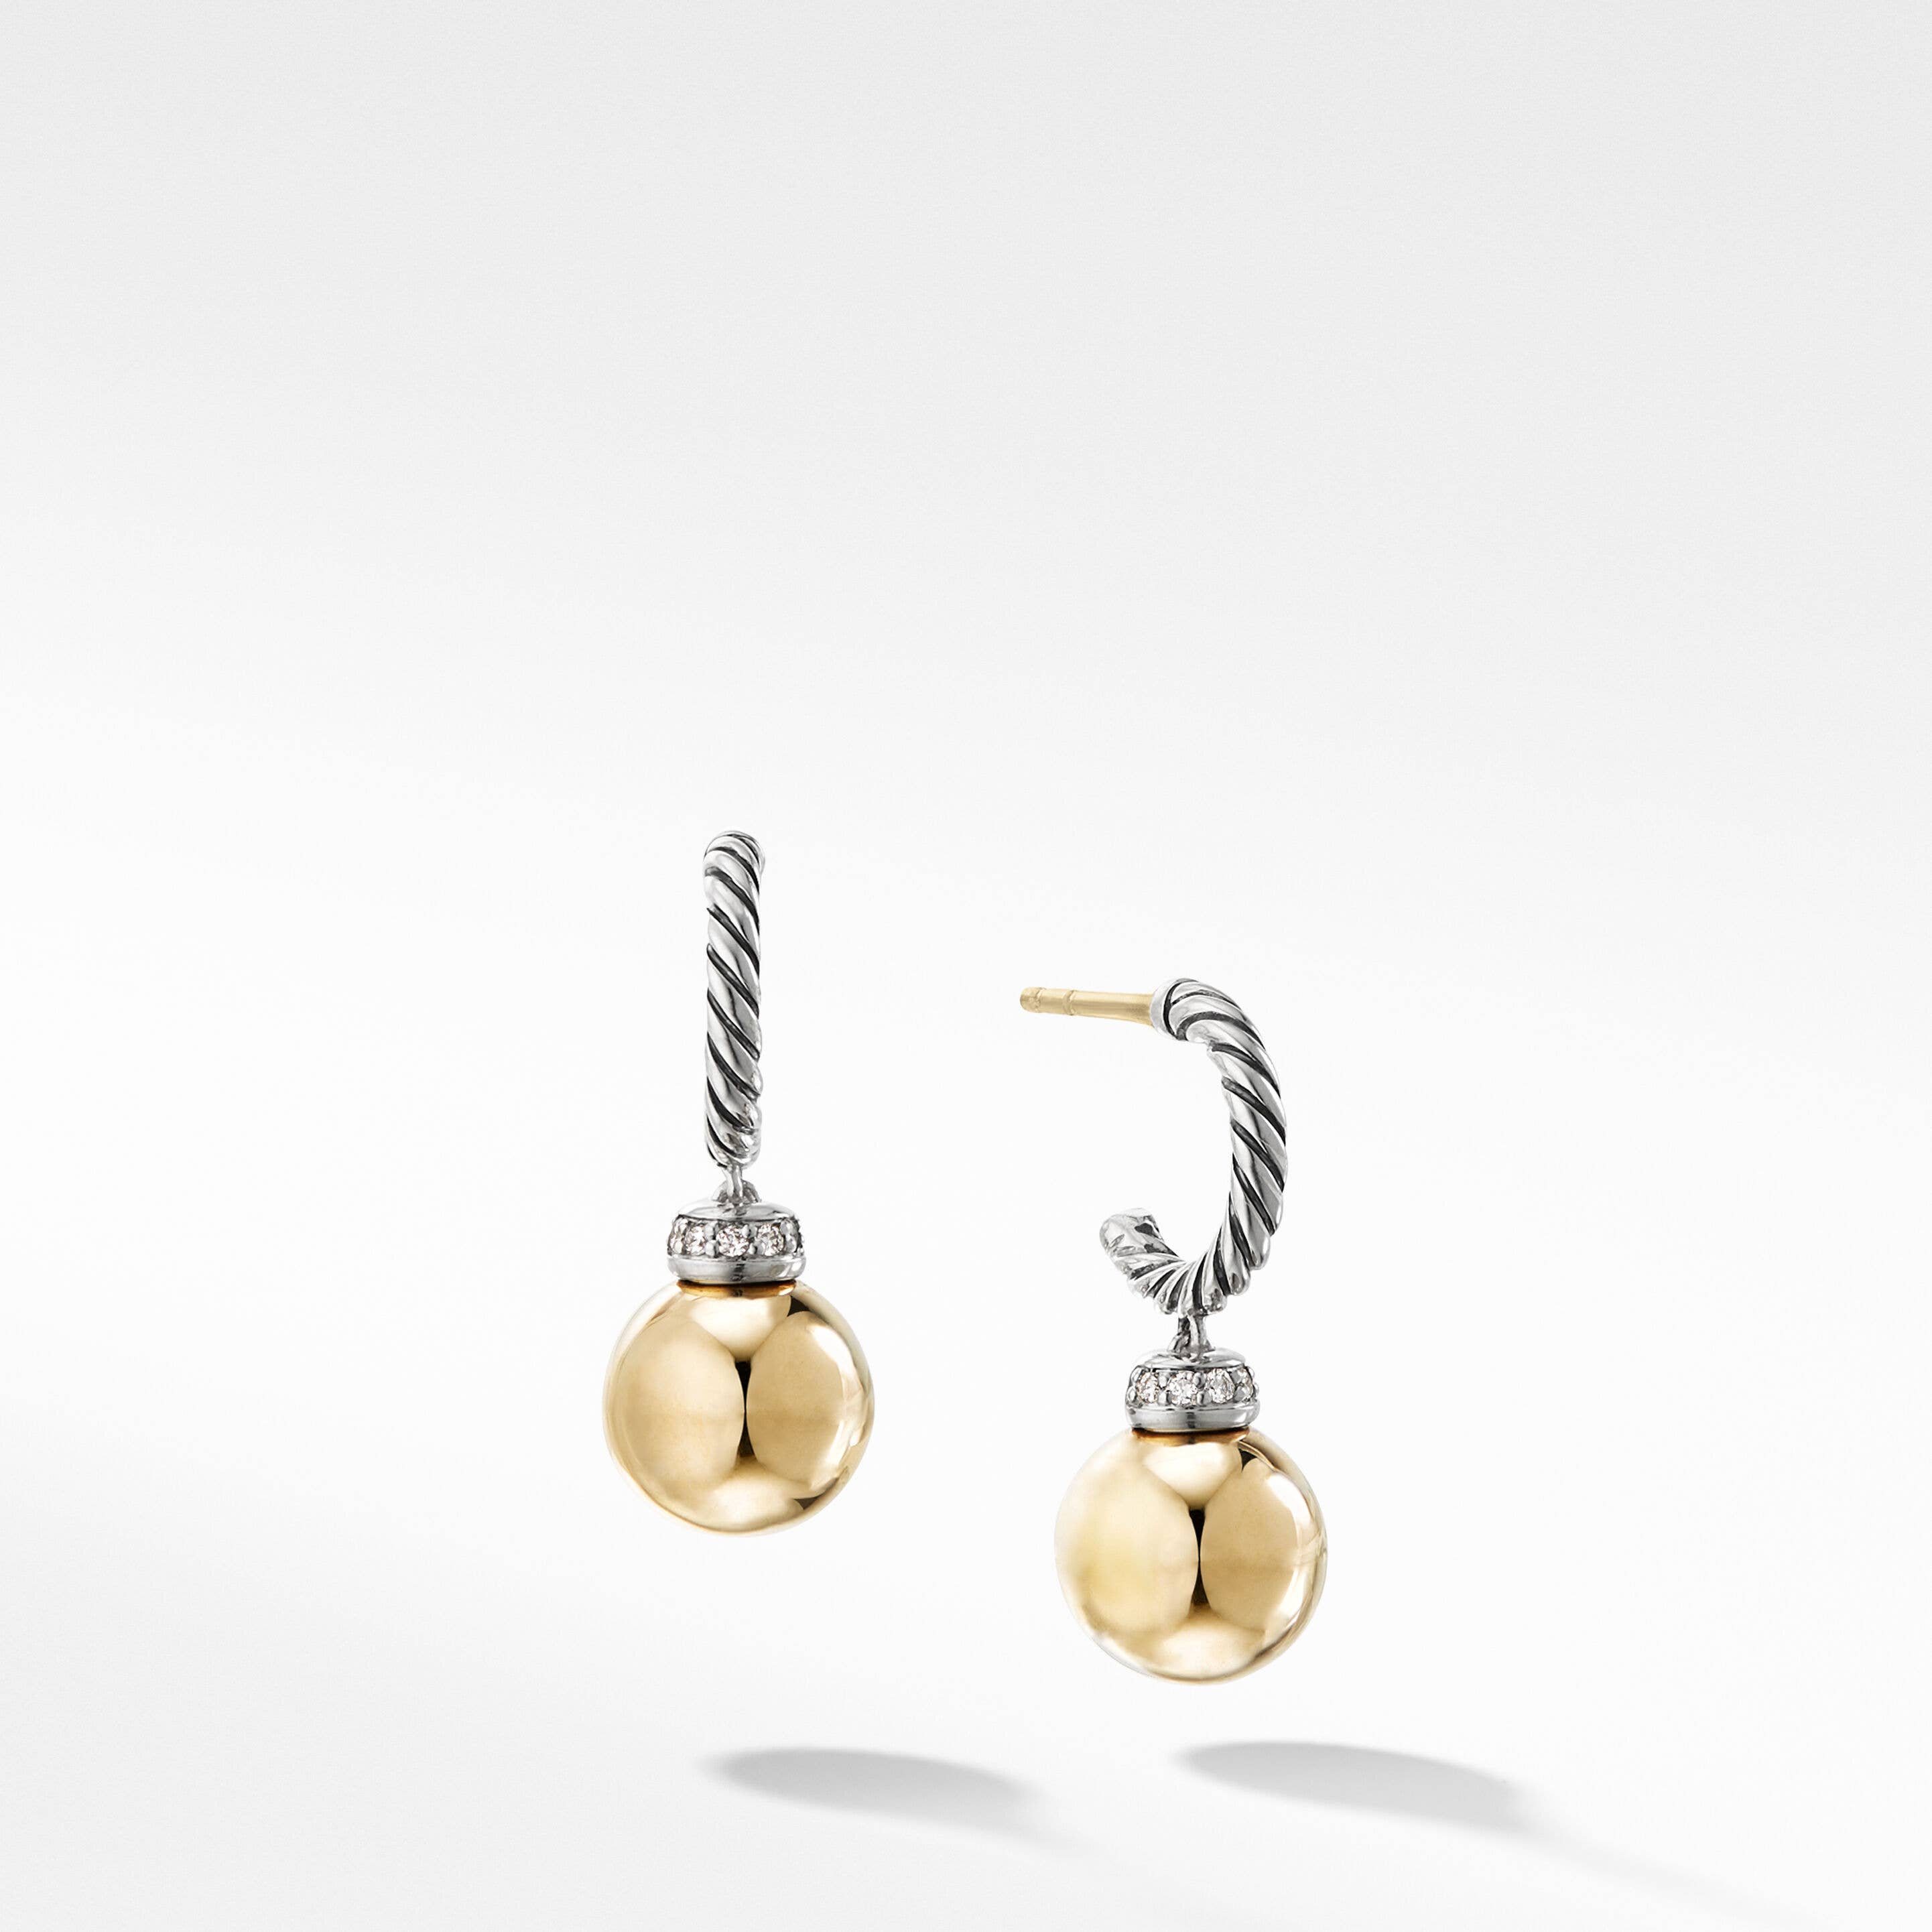 Solari Drop Earrings with 18K Yellow Gold and Pavé Diamonds